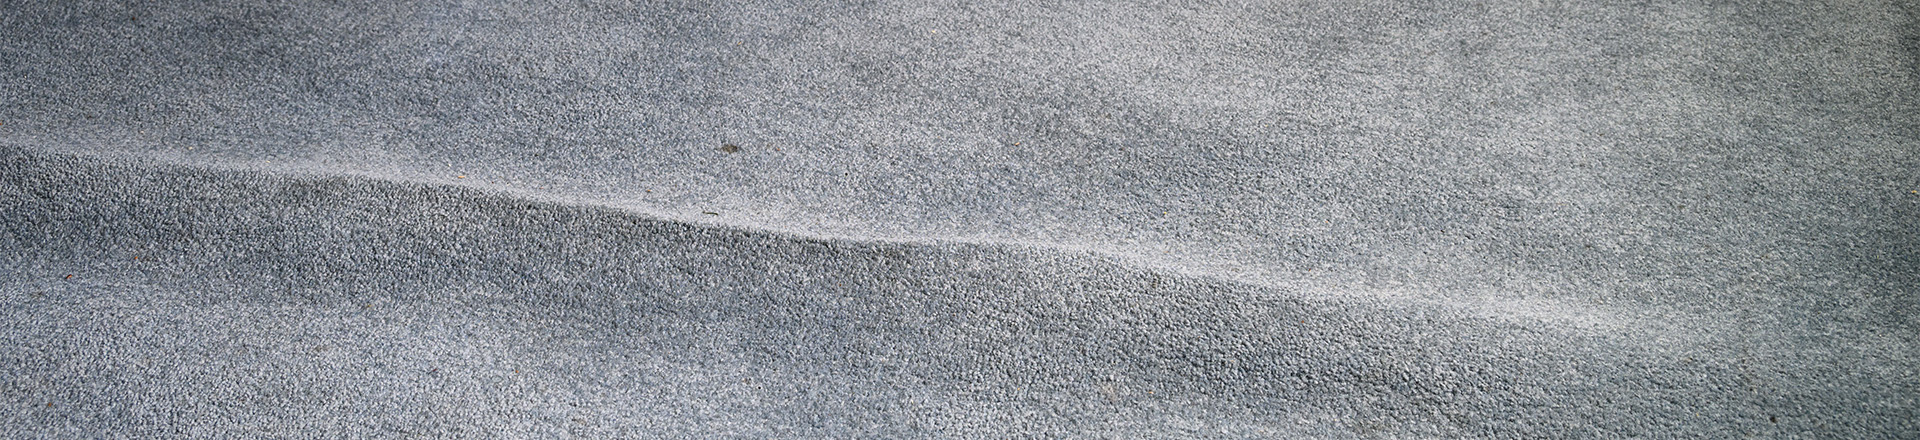 11All about Carpet Stretching (And Why You’ll Love It)